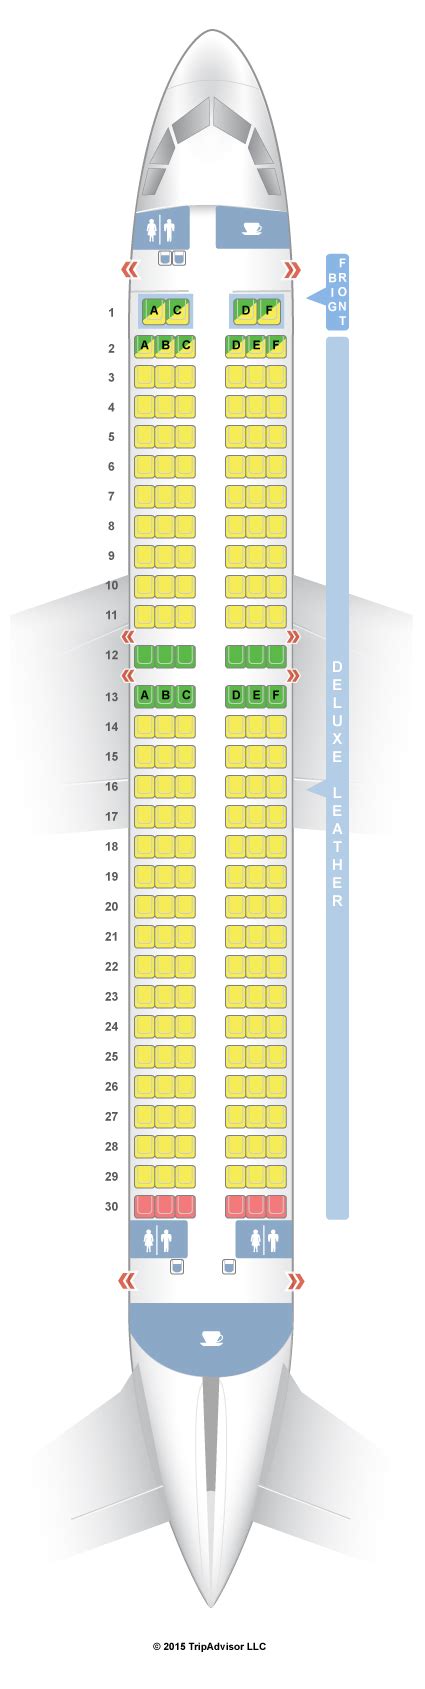 Planes & Seat Maps > Airbus A320 (320) China Eastern Seat 